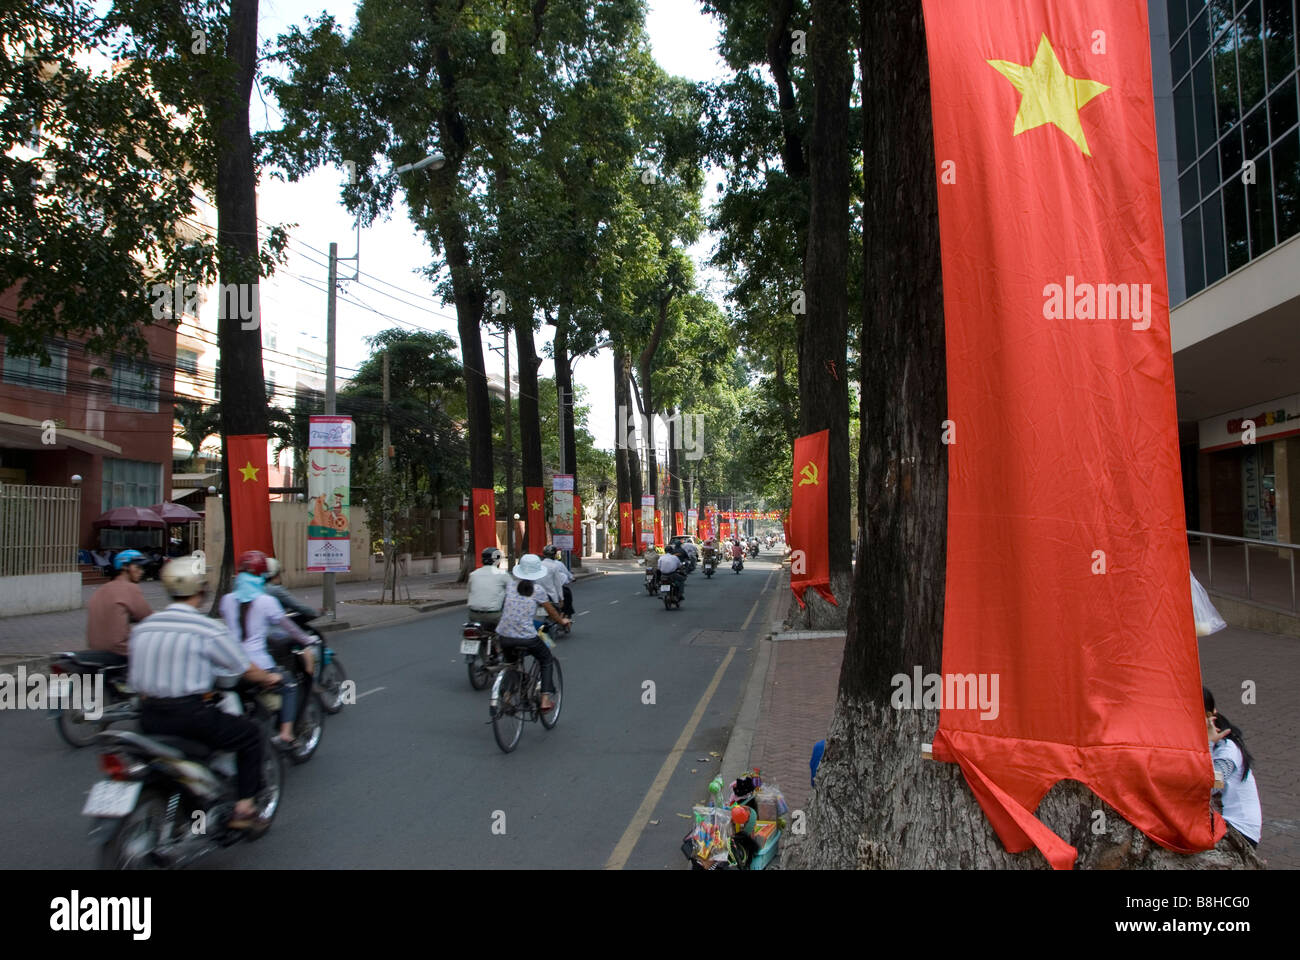 National flags hang in the street in Saigon, Ho Chi Minh City, Vietnam Stock Photo